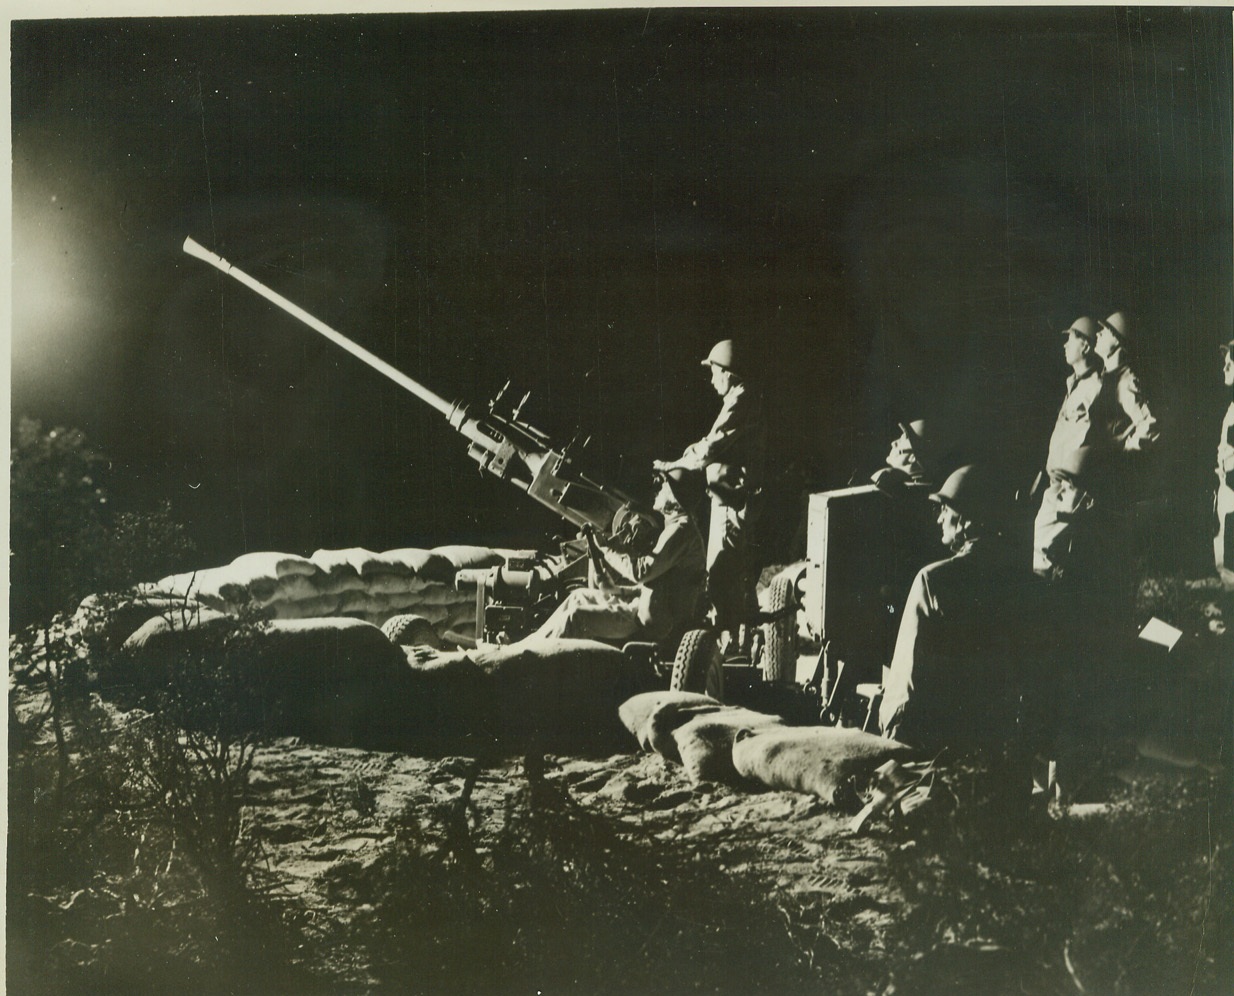 Ready for Night Raiders, 9/29/1942. CALIFORNIA -- A 40-millimeter anti-aircraft gun crew of an anti-aircraft coast artillery unit man their weapon during a night practice demonstration in the California desert. Credit: (ACME);